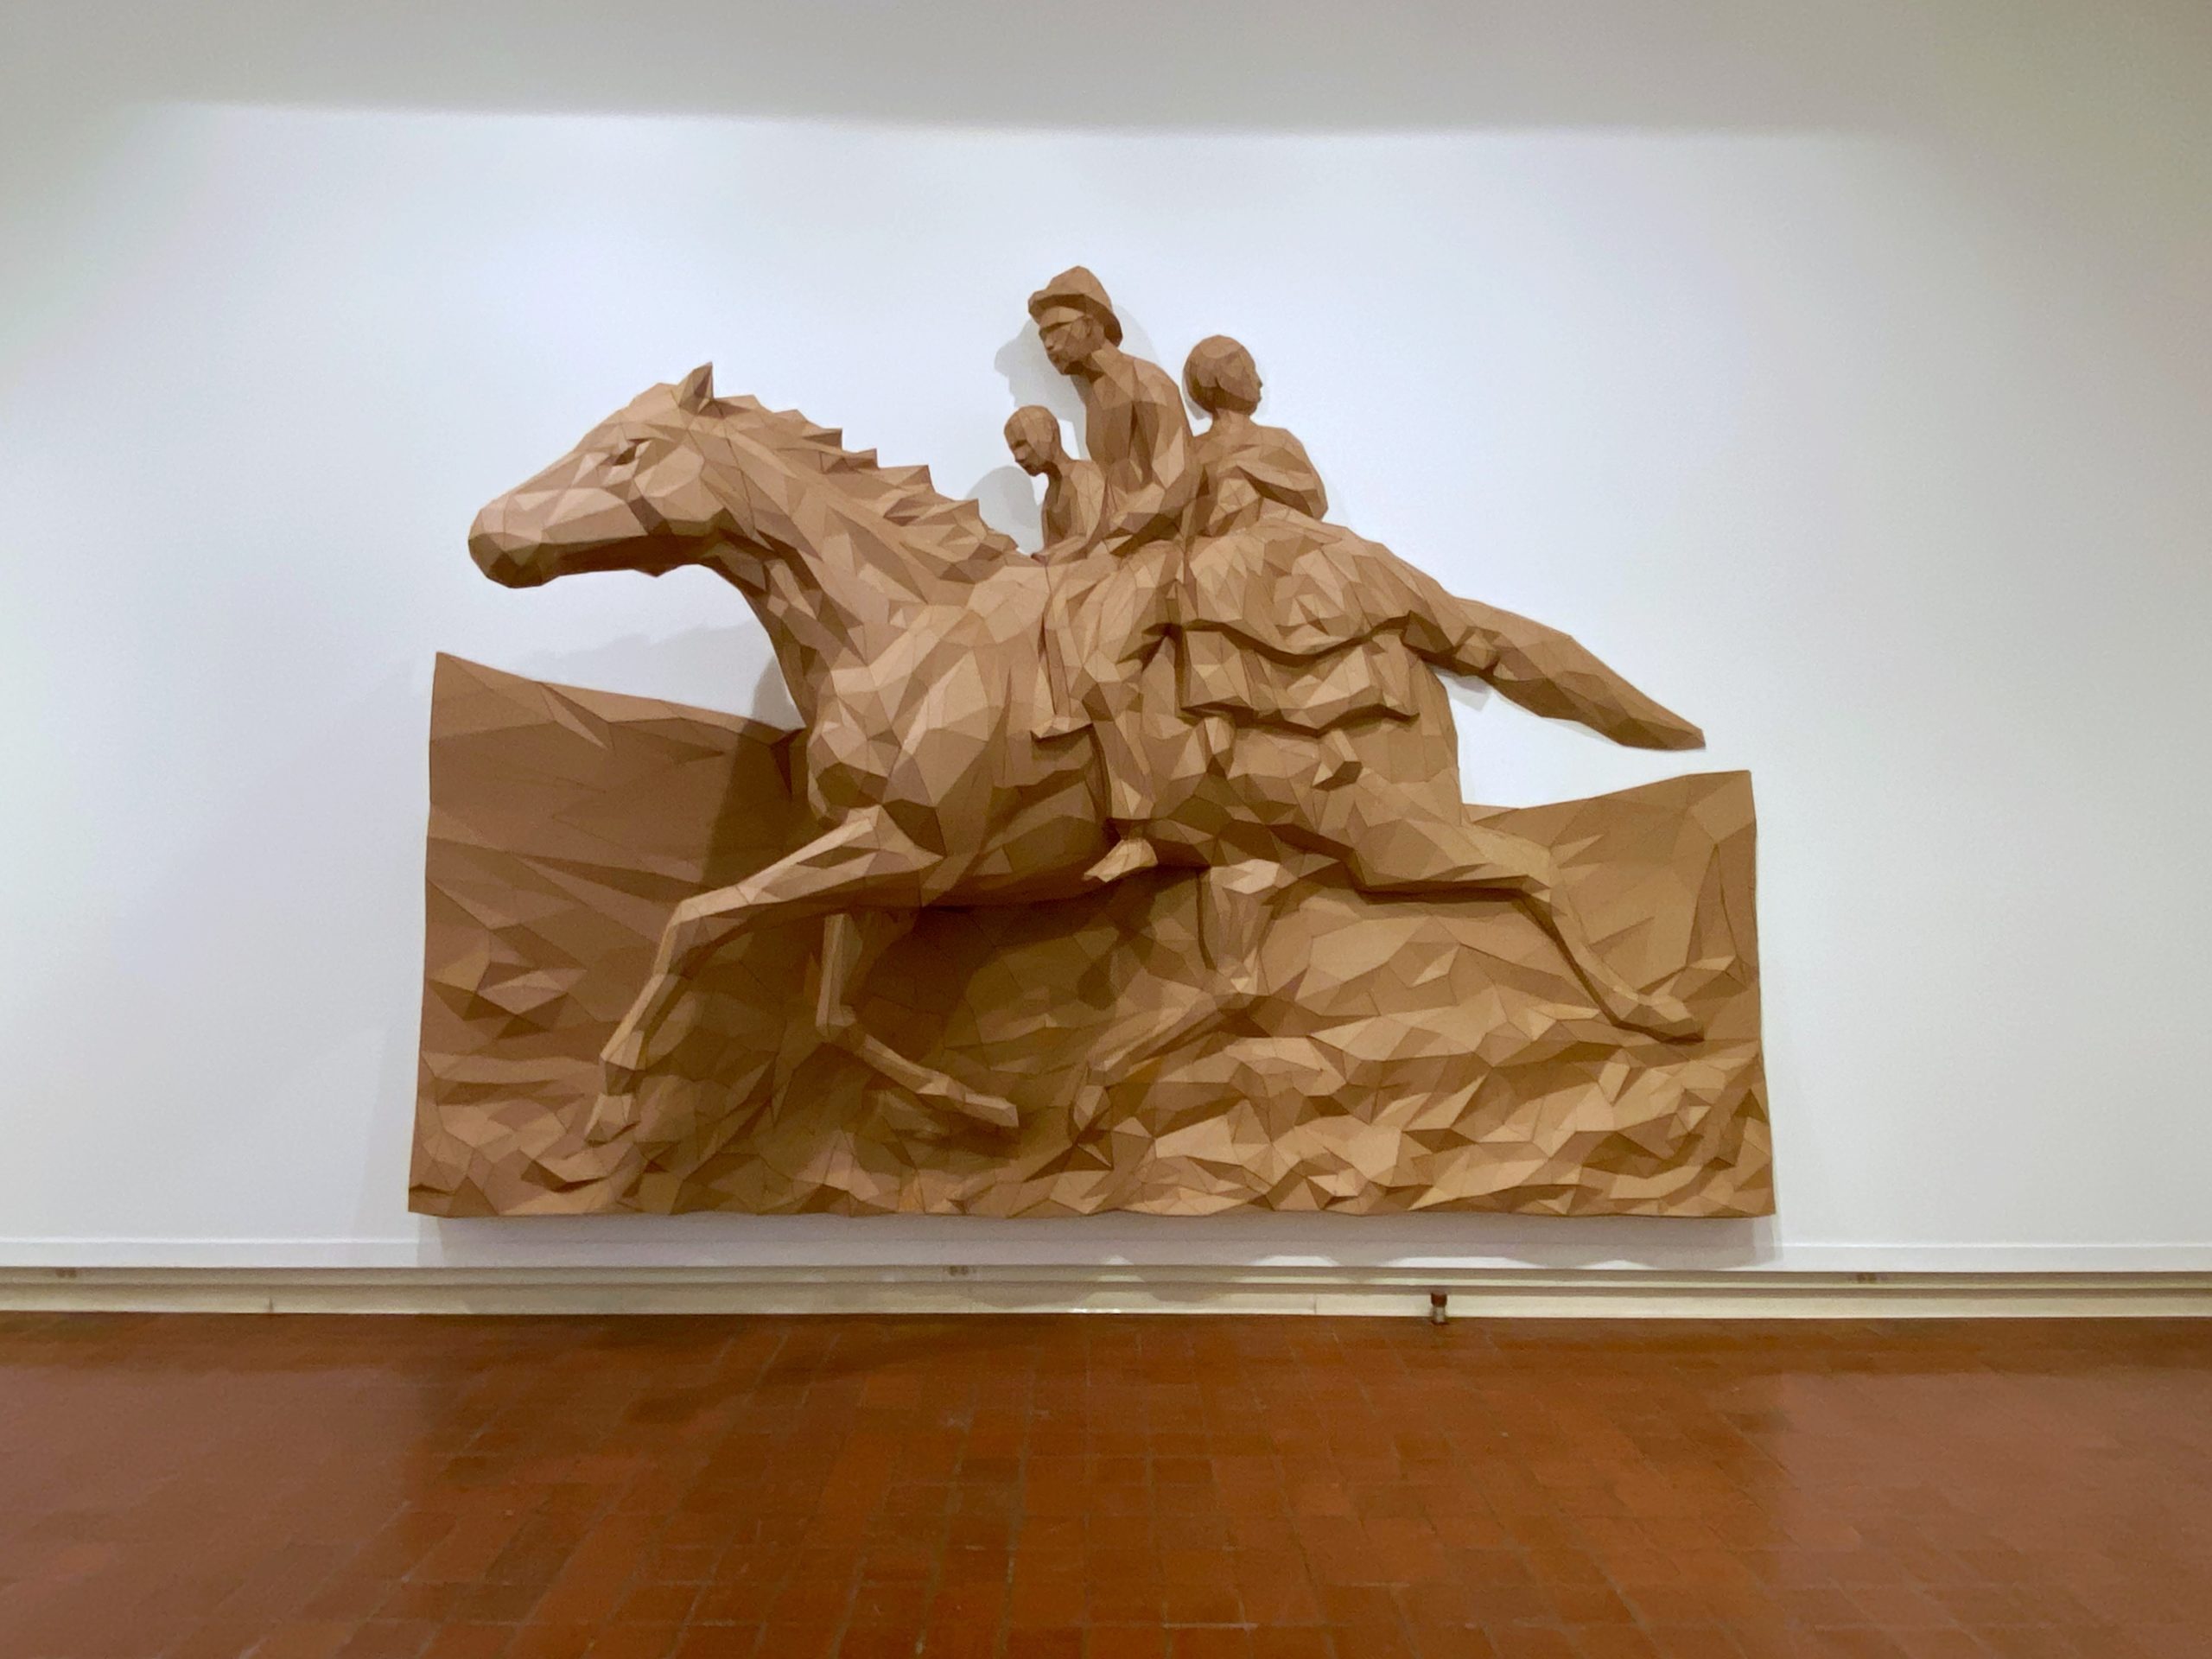 A brown cardboard sculpture, like a relief, of three people riding a horse, mounted on a white gallery wall.